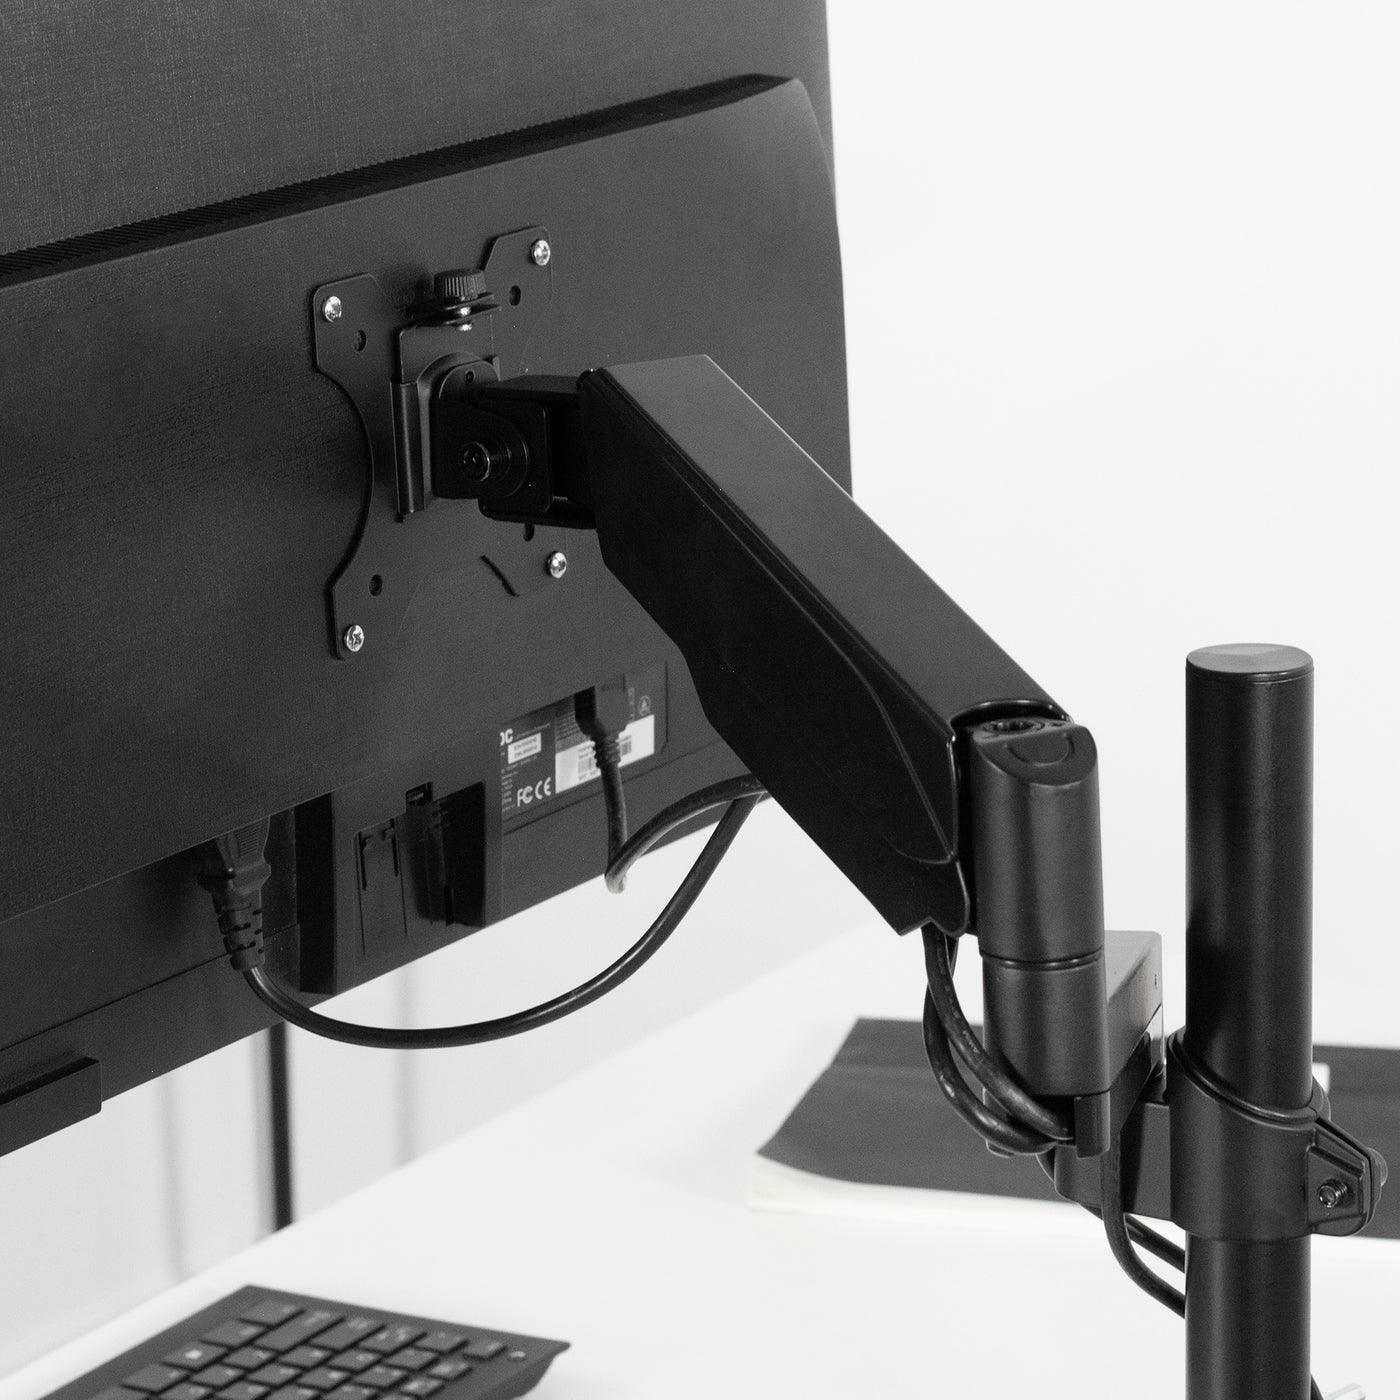 Pneumatic monitor mount arm for standard clamp on desk pole.